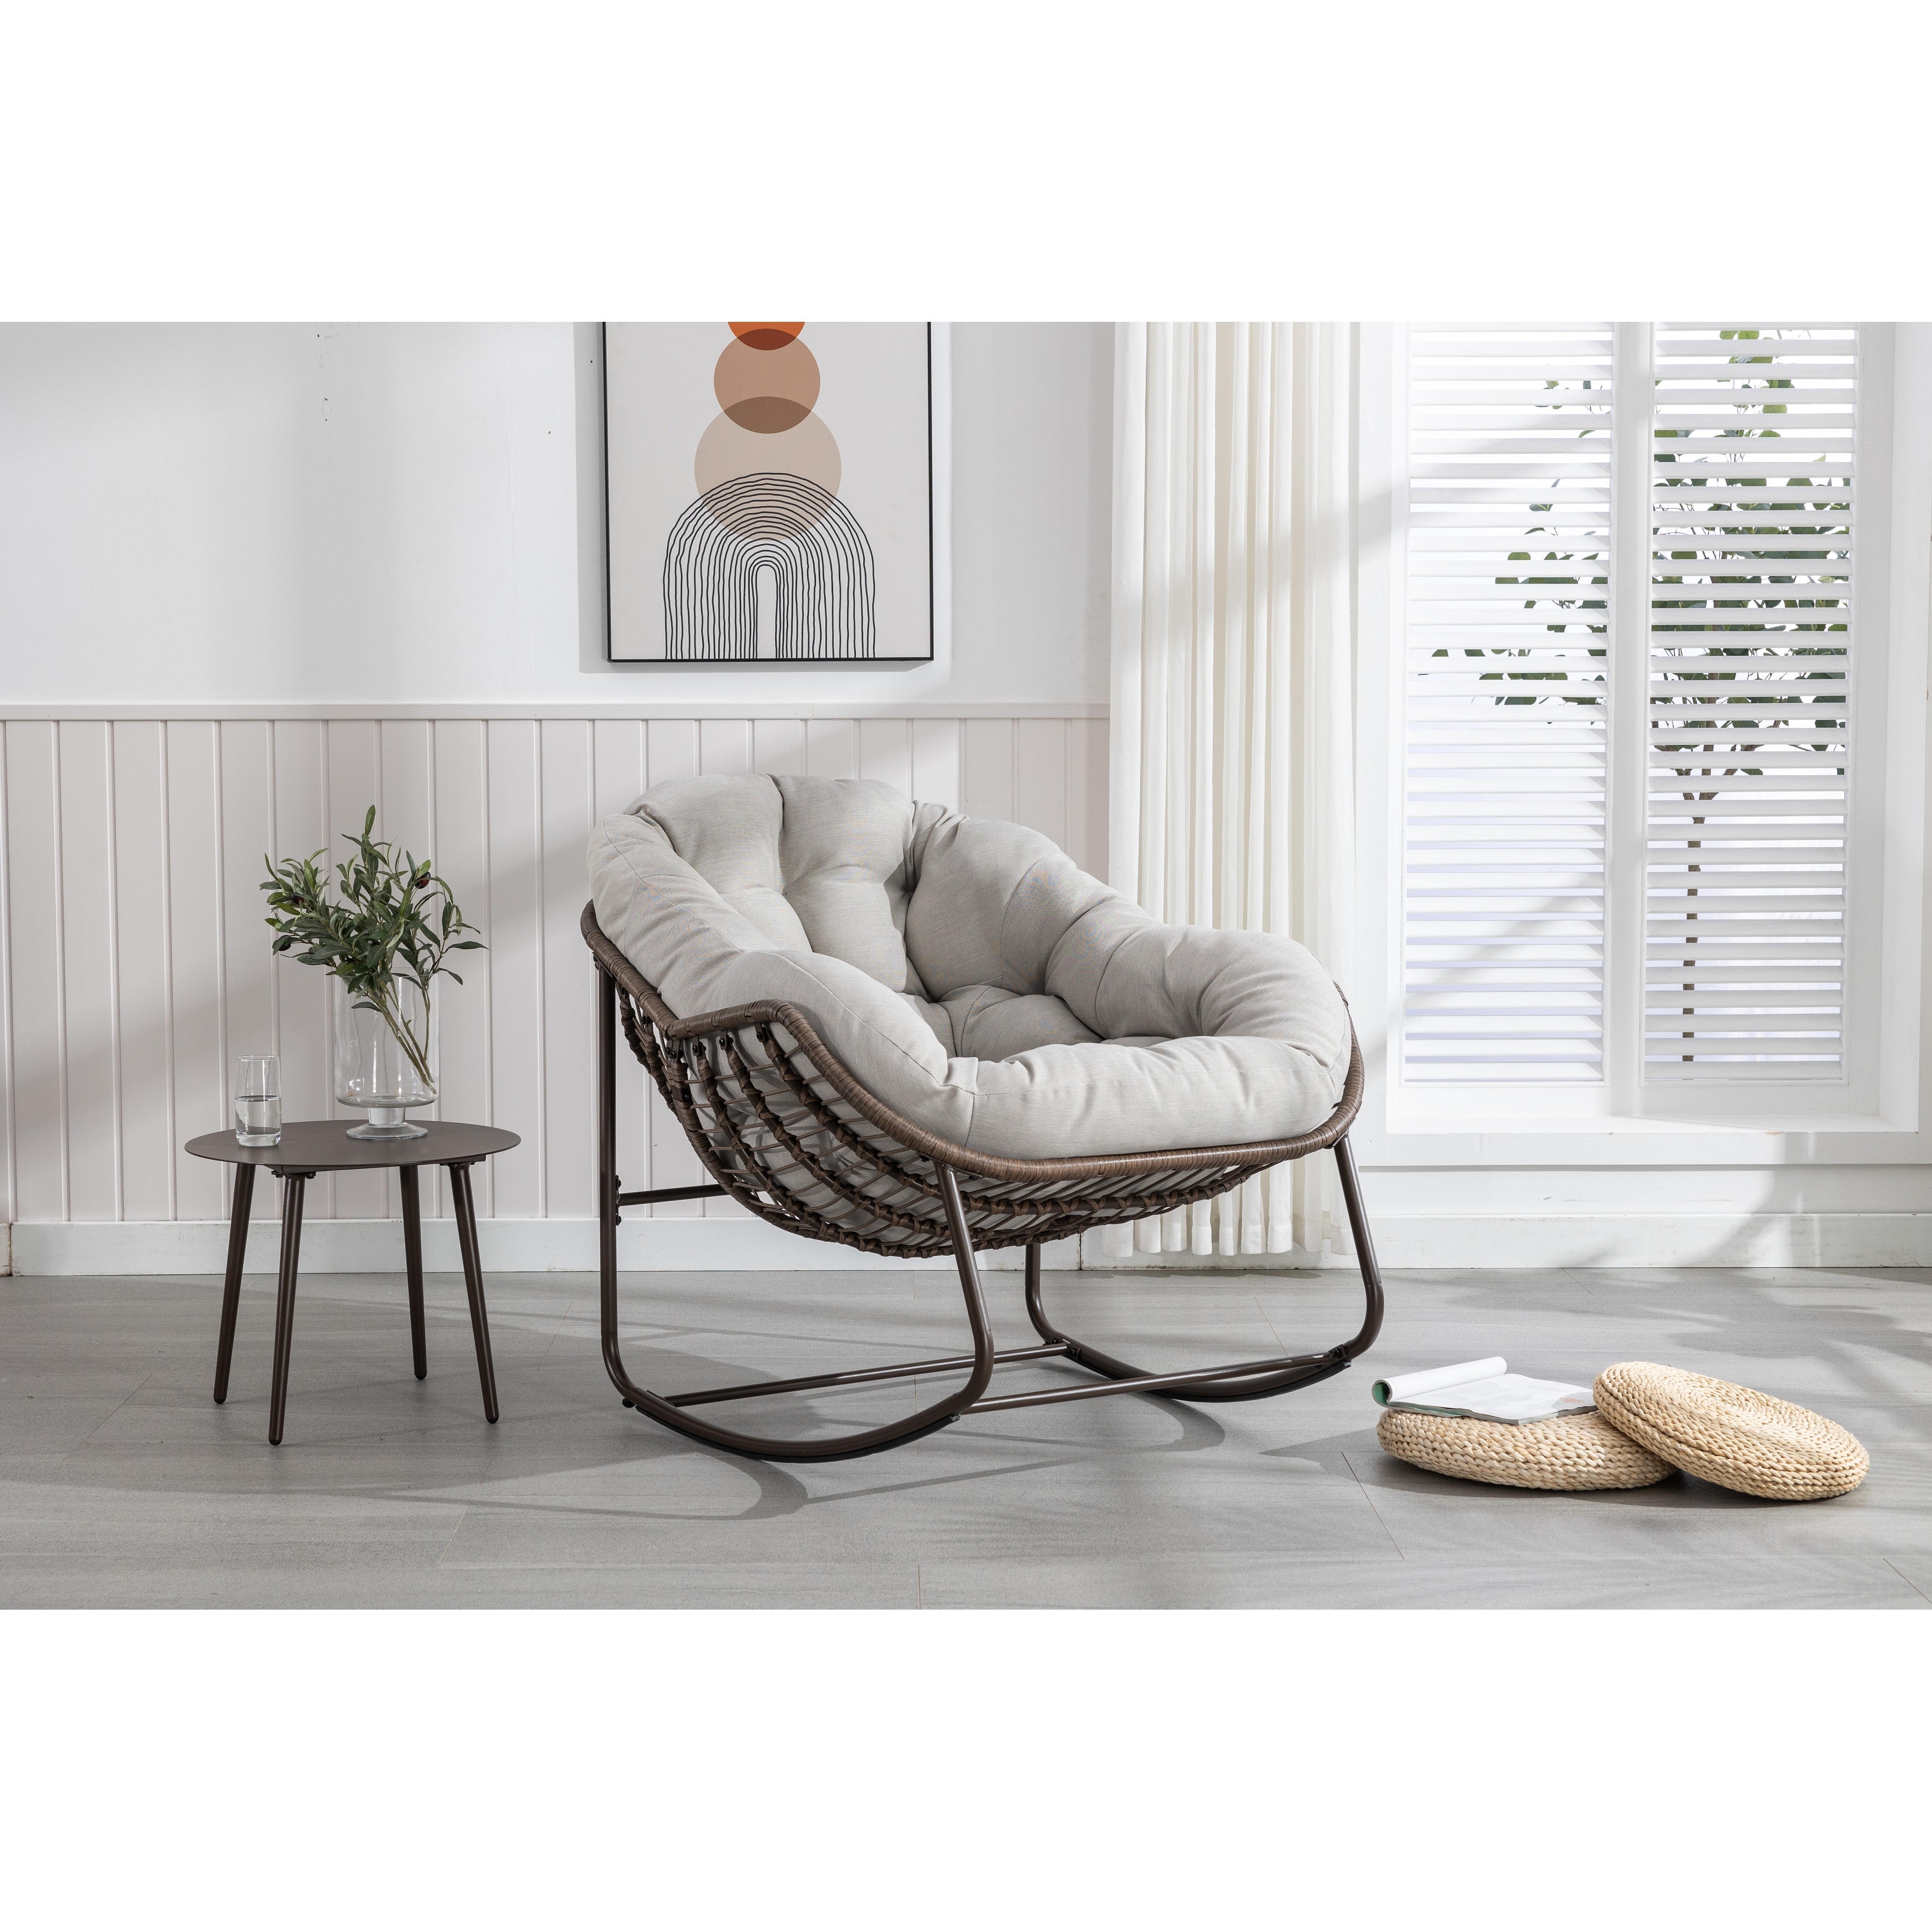 https://ak1.ostkcdn.com/images/products/is/images/direct/a5cd398809799b33ab20a7bd04b933fe2ce0878c/Outdoor-Rattan-Rocking-Chair%2CPadded-Cushion-Rocker-Recliner-Chair-Outdoor-for-Front-Porch%2C-Living-Room%2C-Patio%2C-Garden.jpg